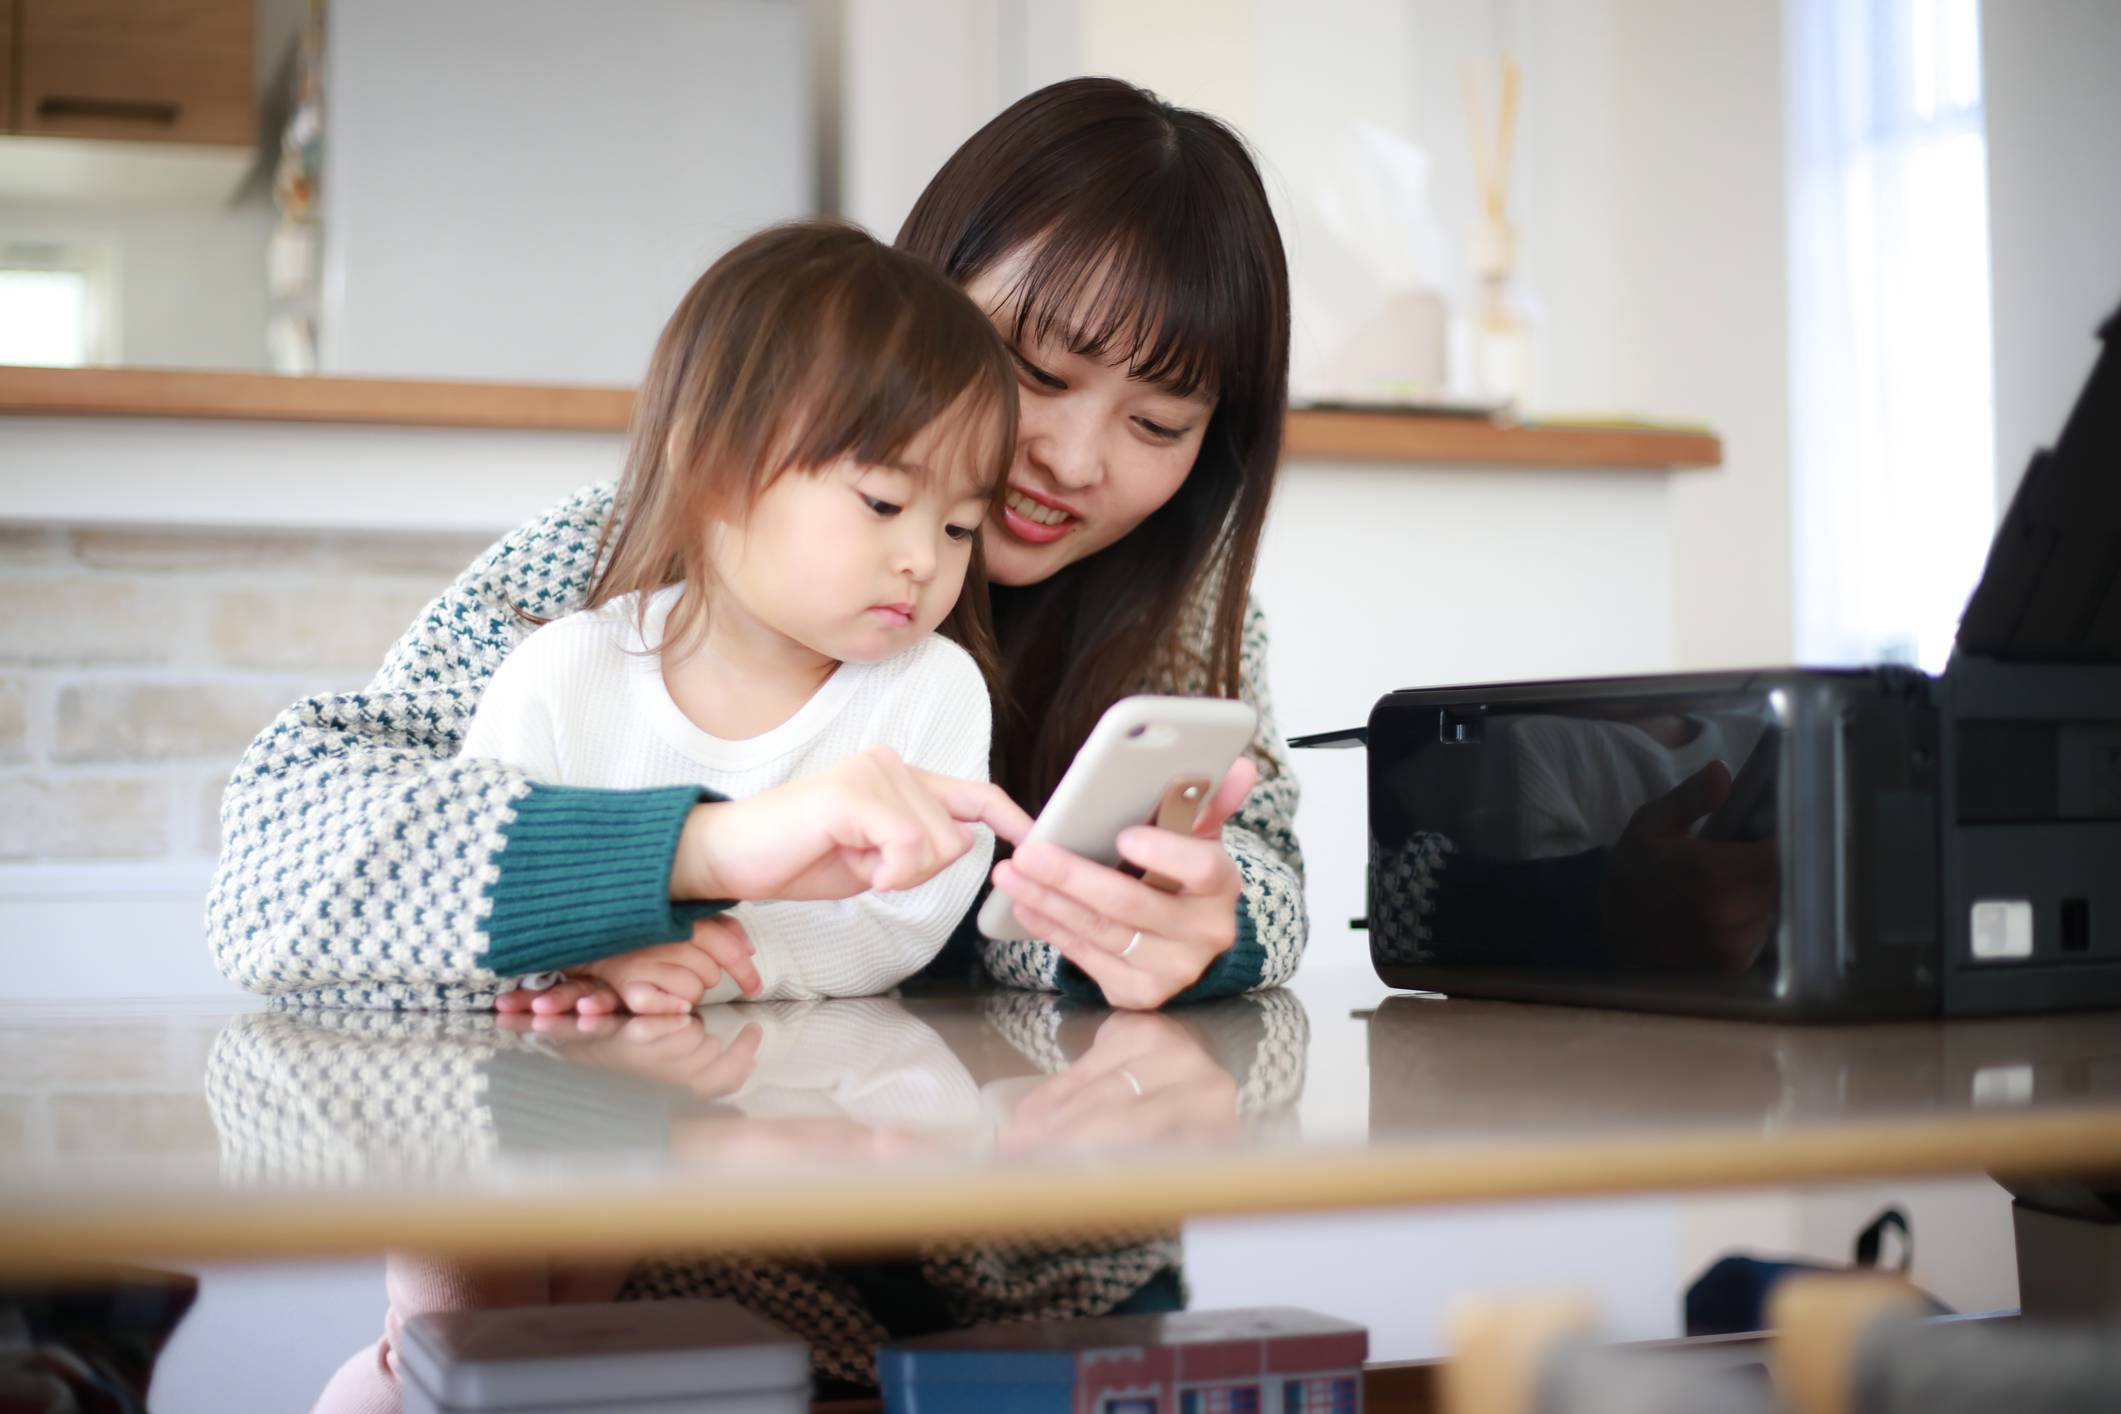 A Japanese study showed that children who used digital devices with screens for over one hour per day at age 2 saw no effect in their ability to socialize at age 4. | GETTY IMAGES